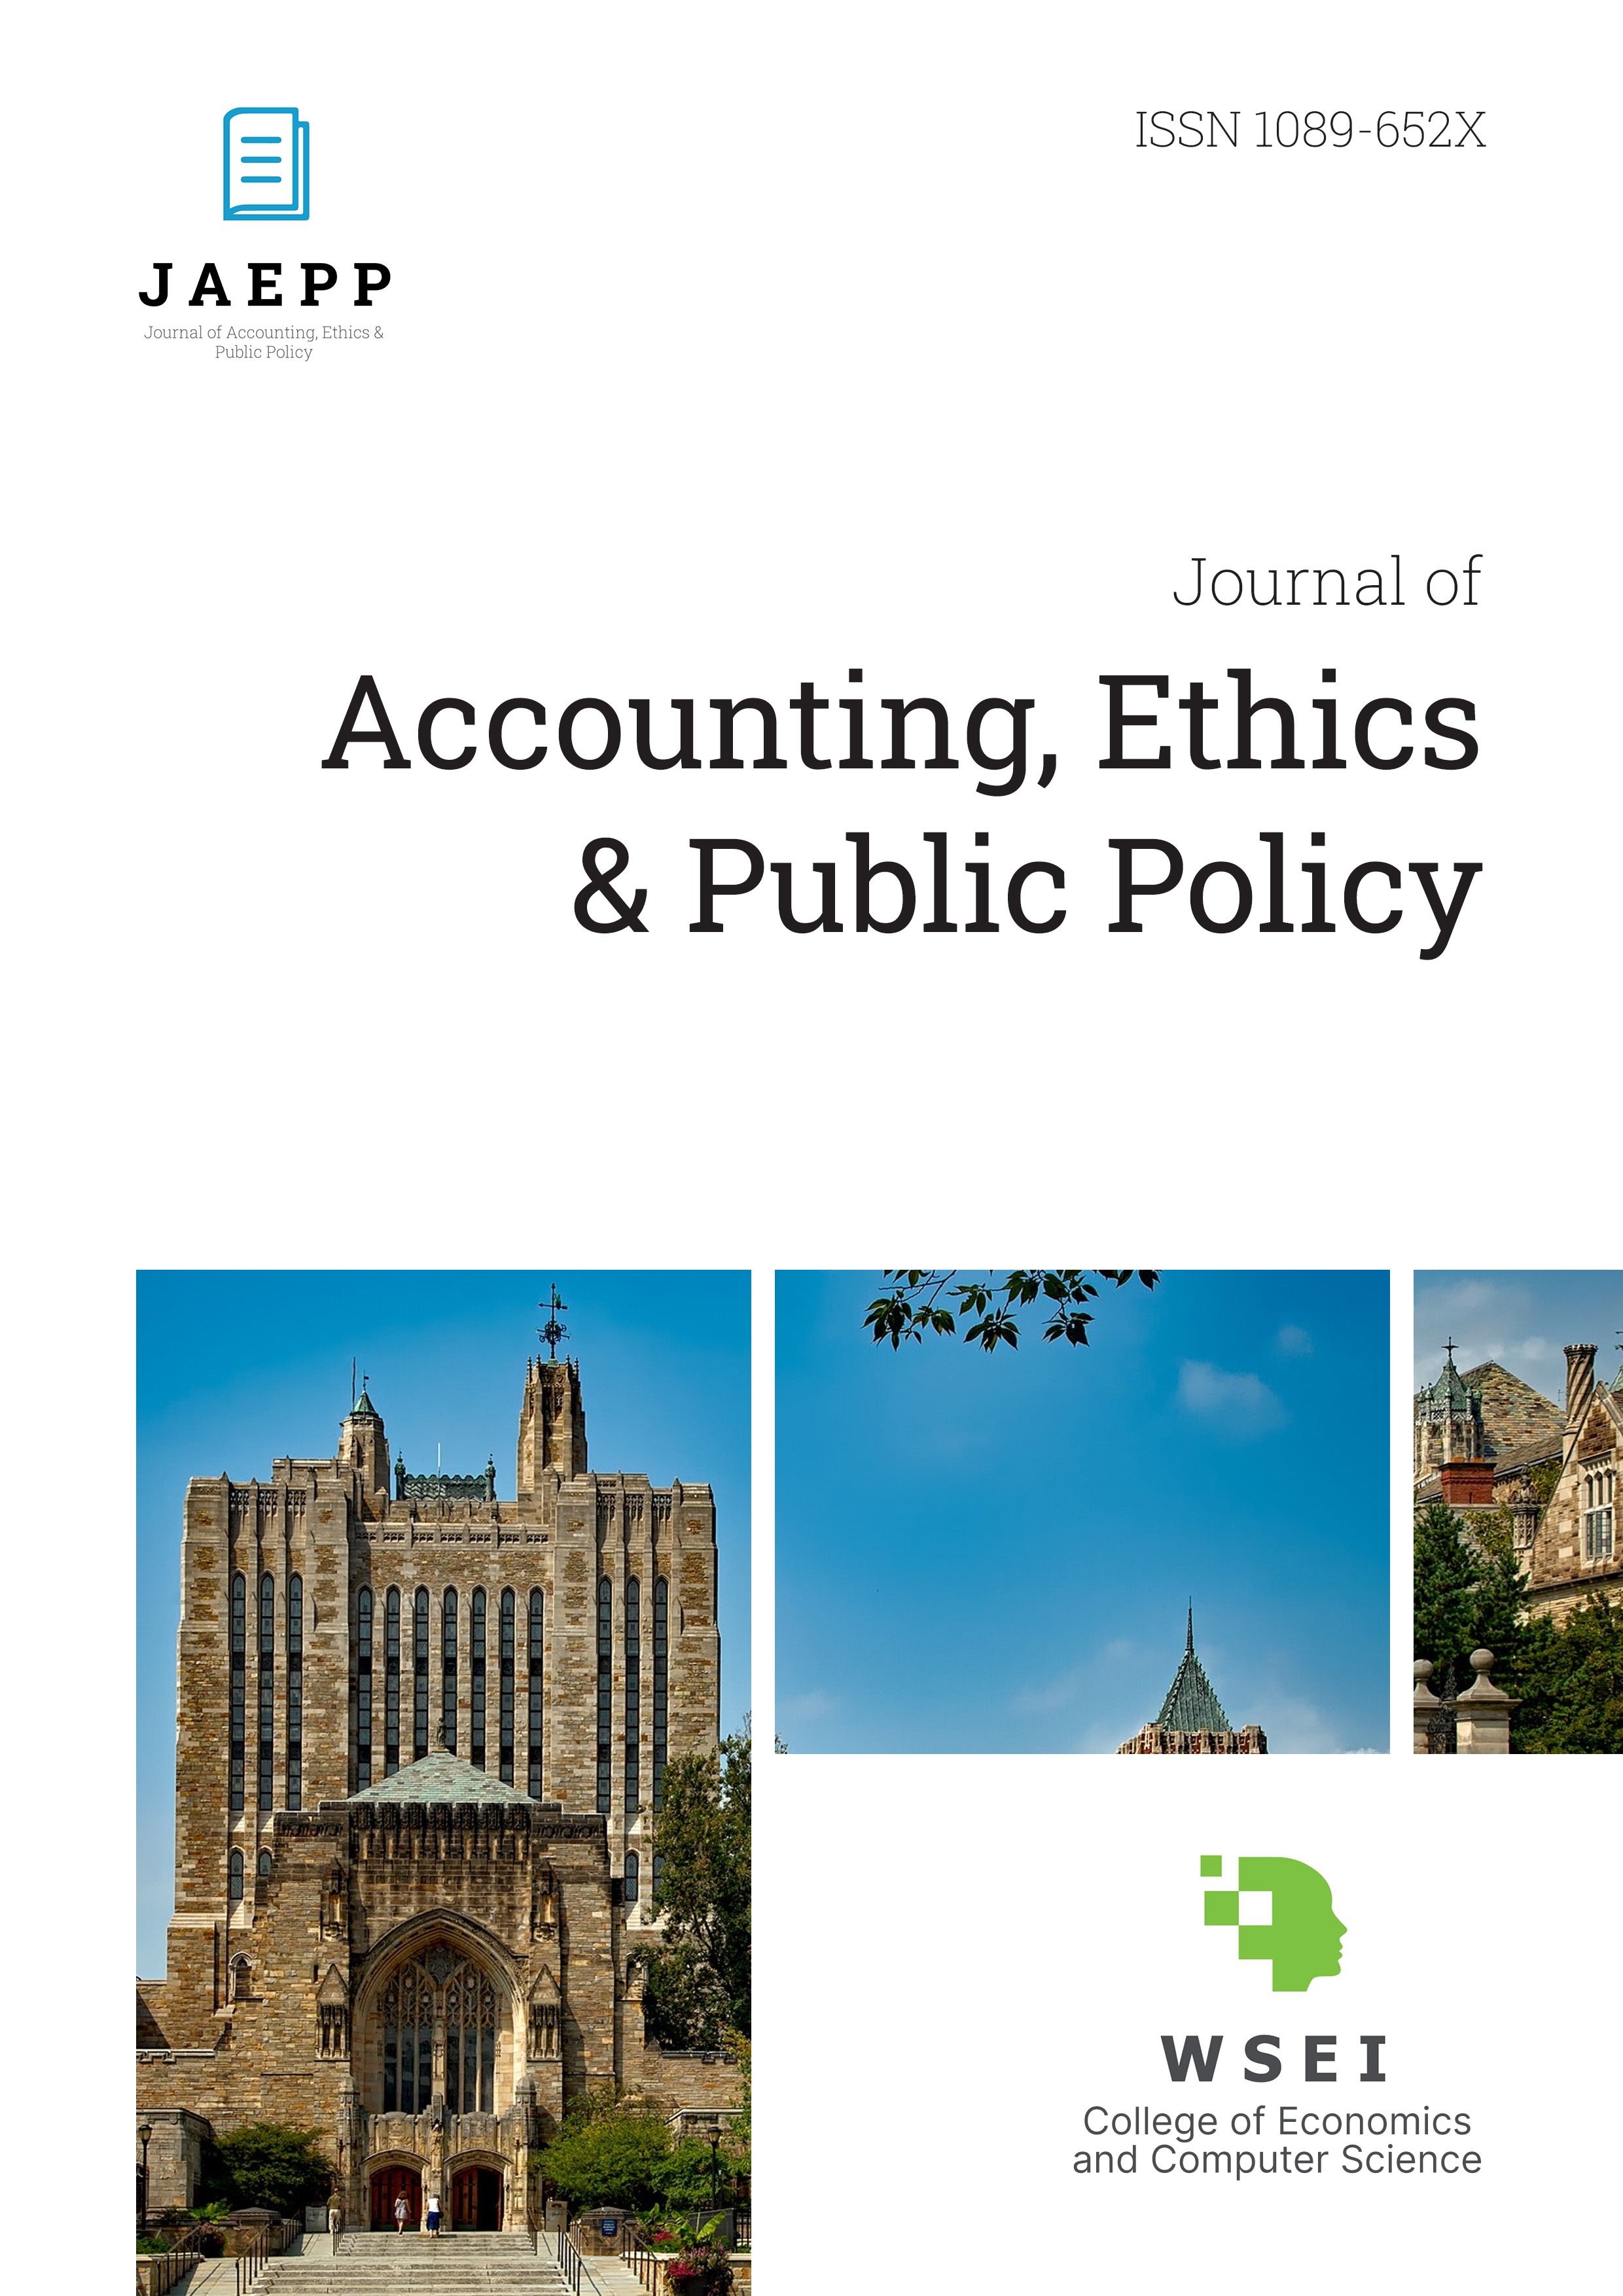 					View Vol. 22 No. 3 (2021): Journal of Accounting, Ethics & Public Policy, JAEPP
				